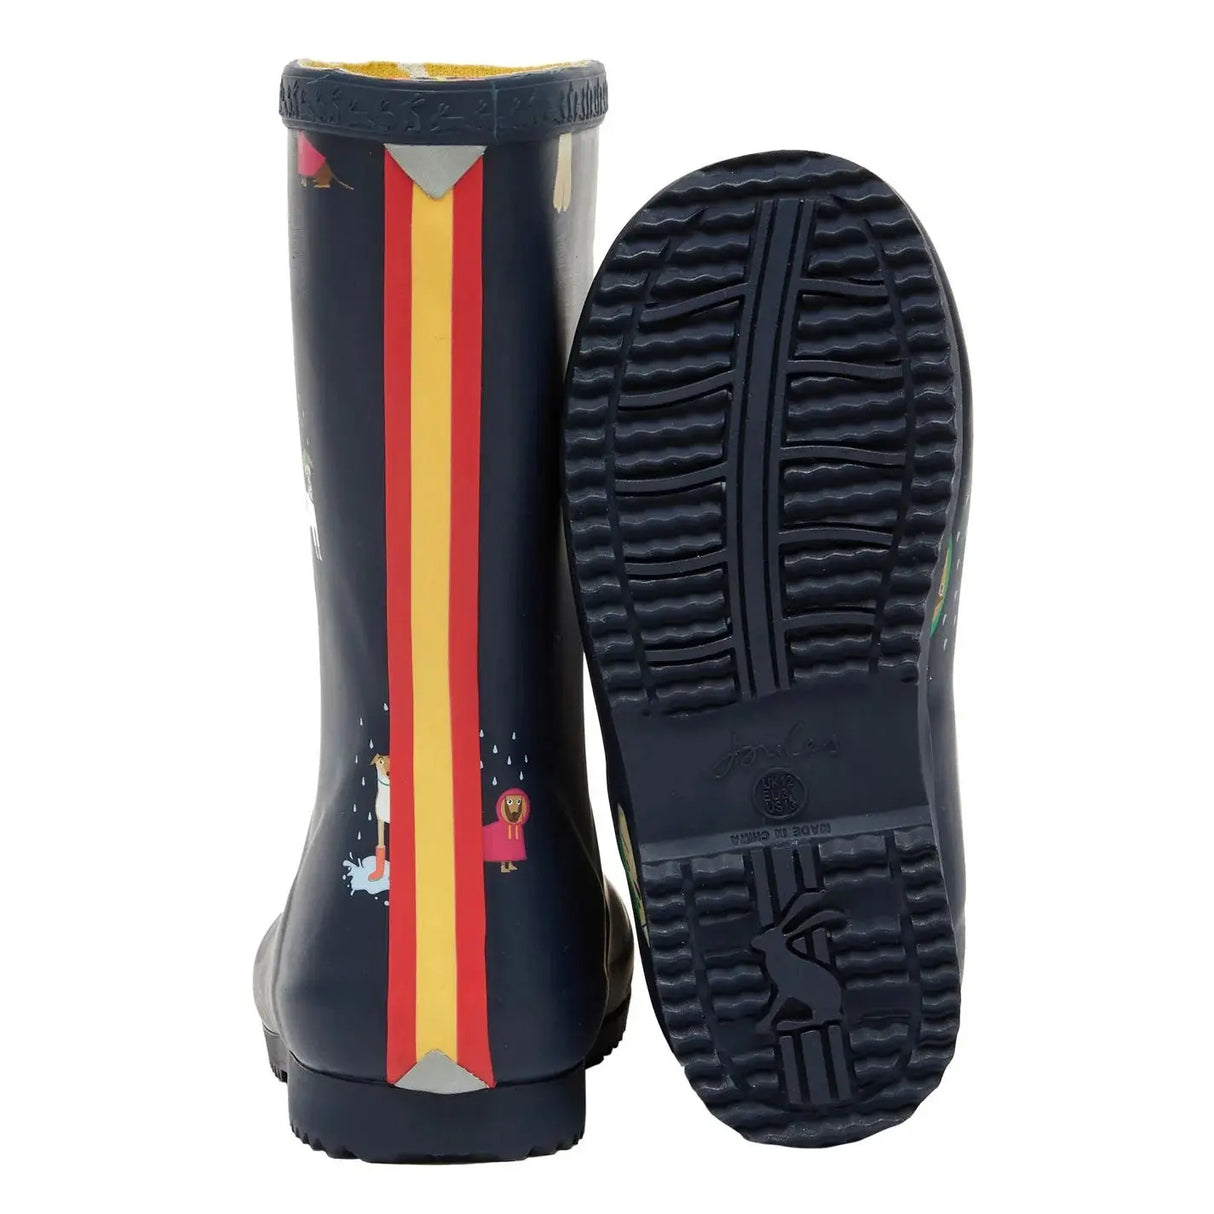 Multi Dogs Roll Up Flexible Printed Welly Rain Boots | Joules - Jenni Kidz